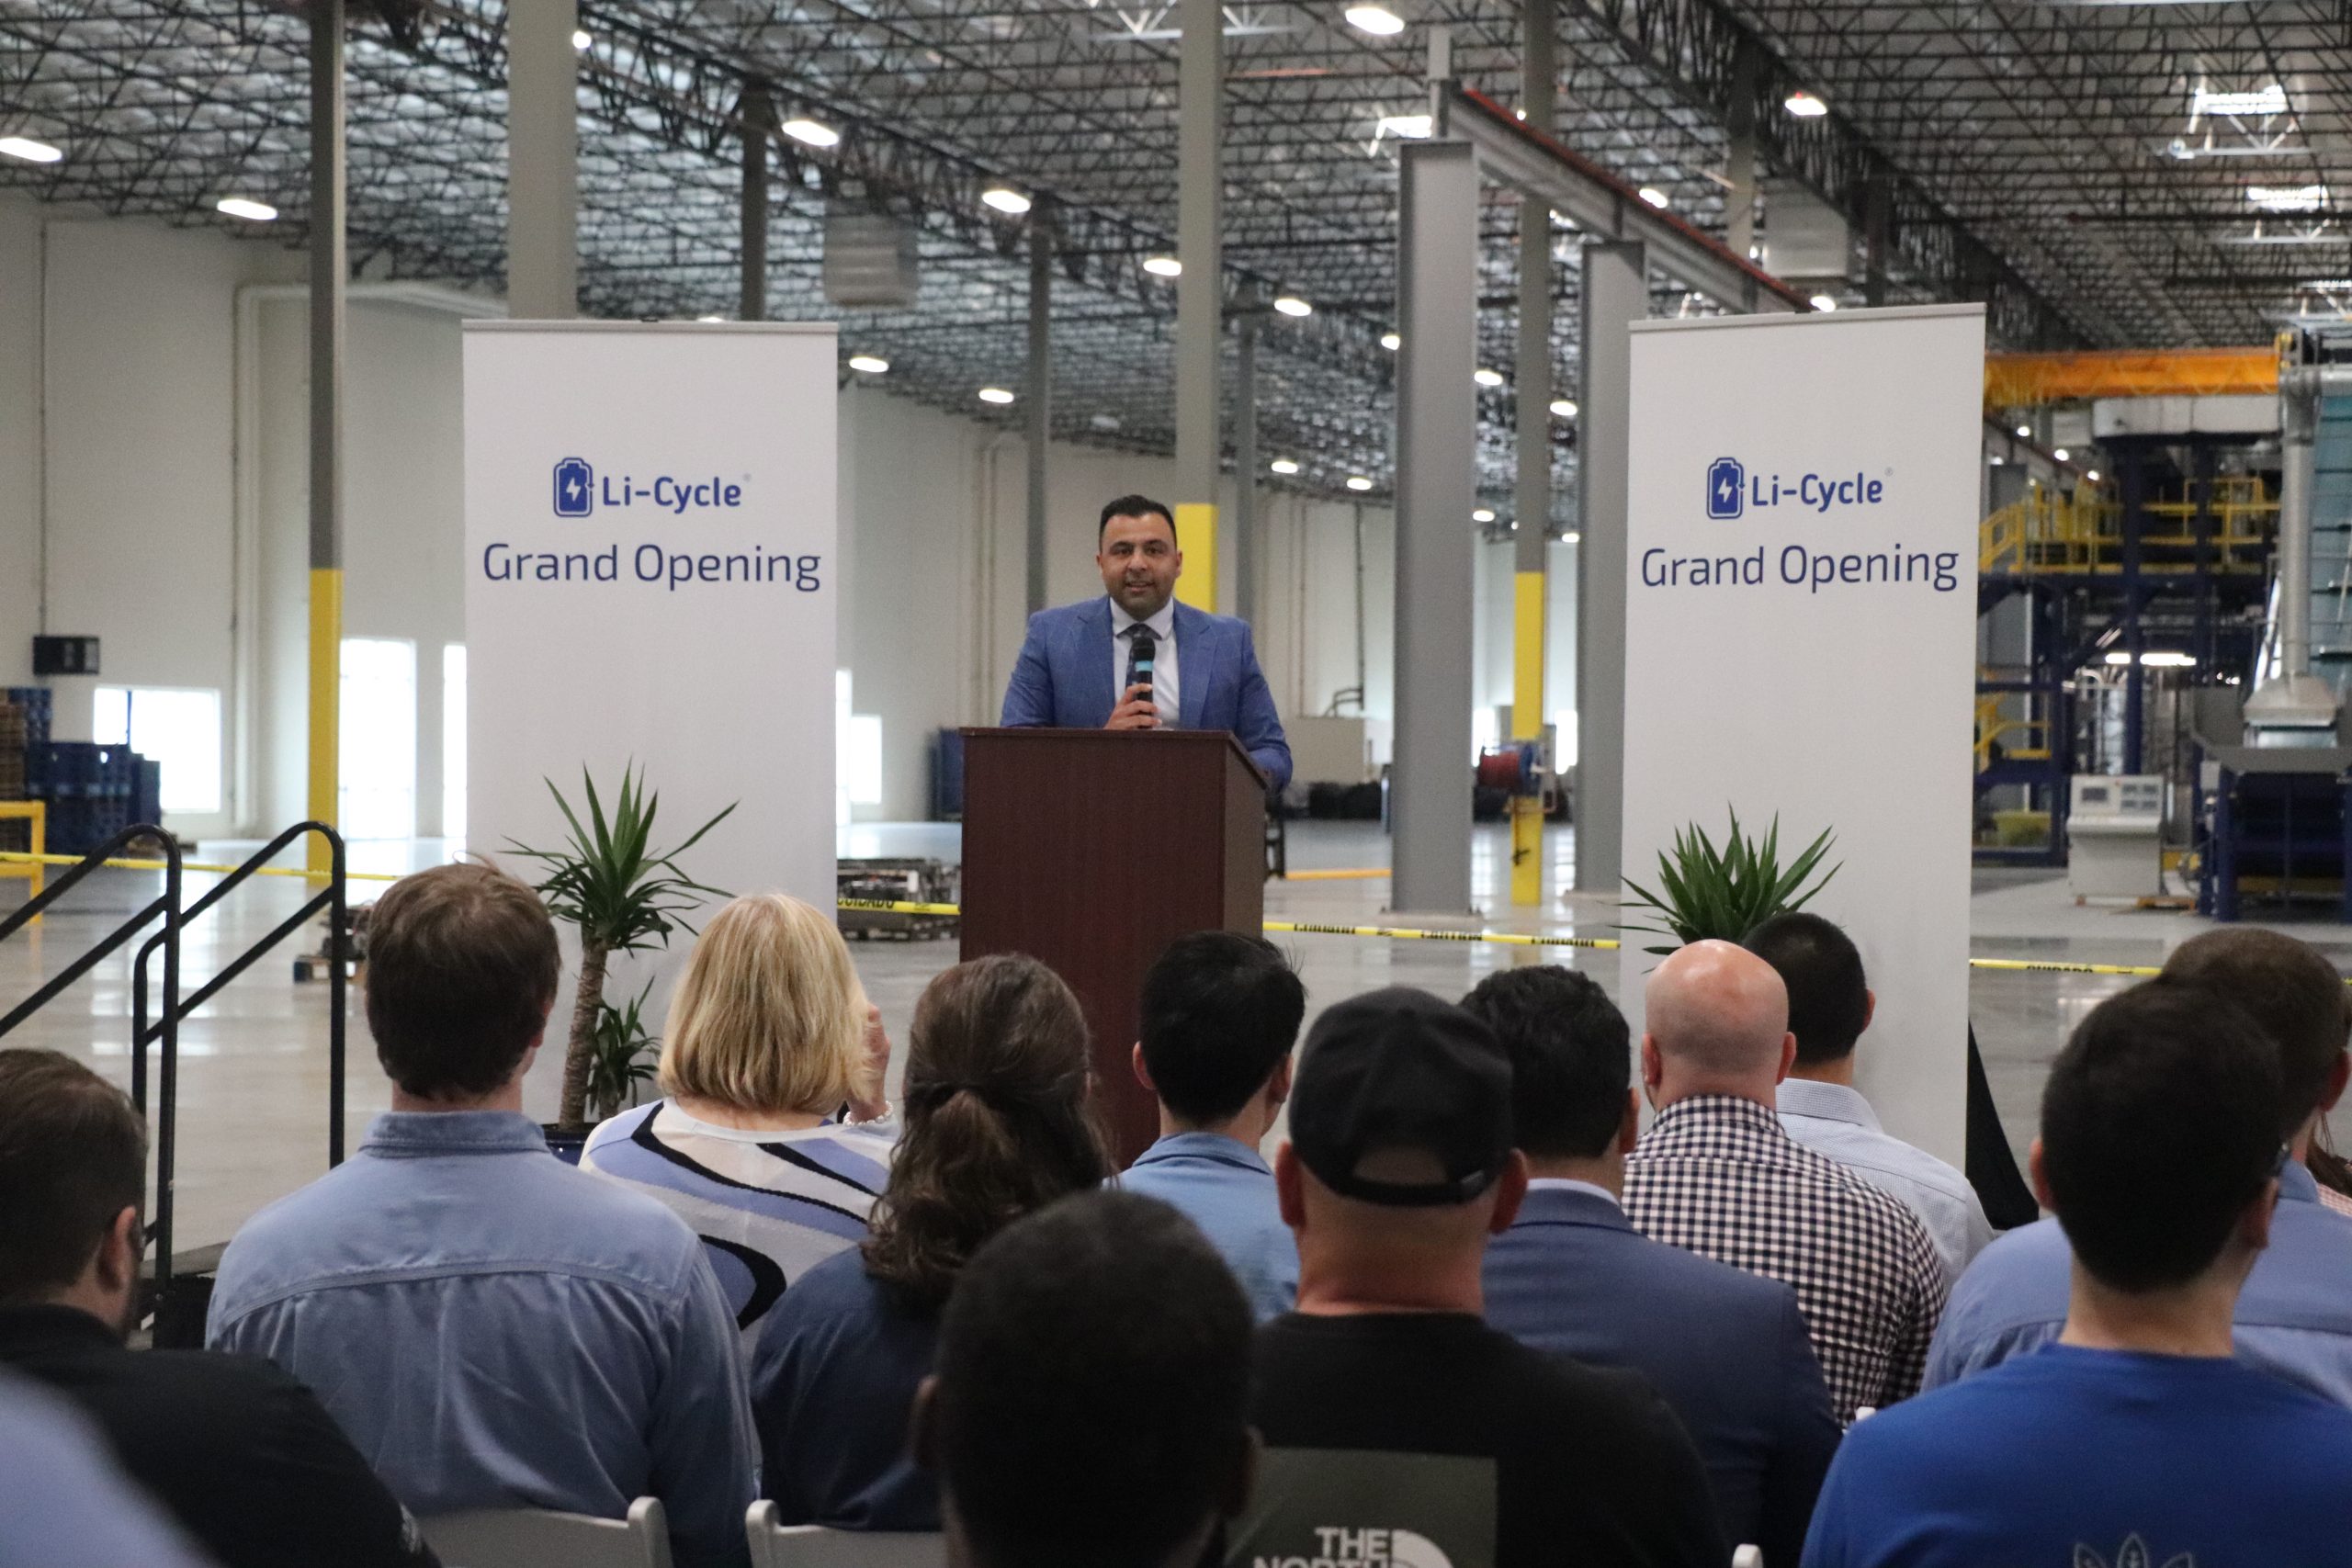 Ajay Kochhar, CEO and co-founder of Li-Cycle speaking at a podium at Arizona Spoke Grand Opening